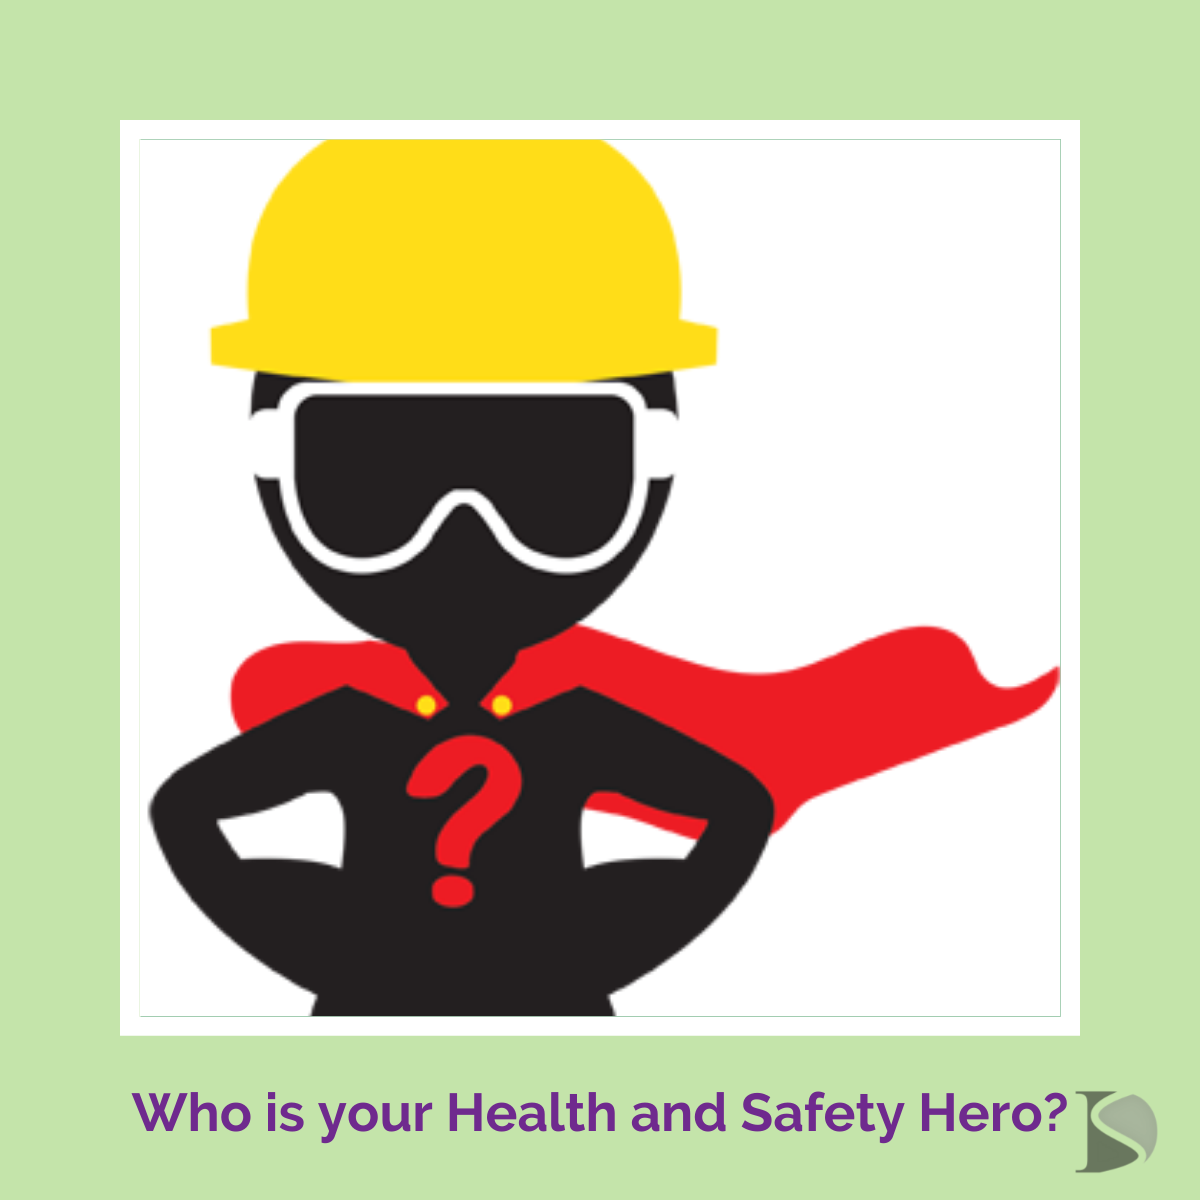 Who is your Health and Safety Hero?